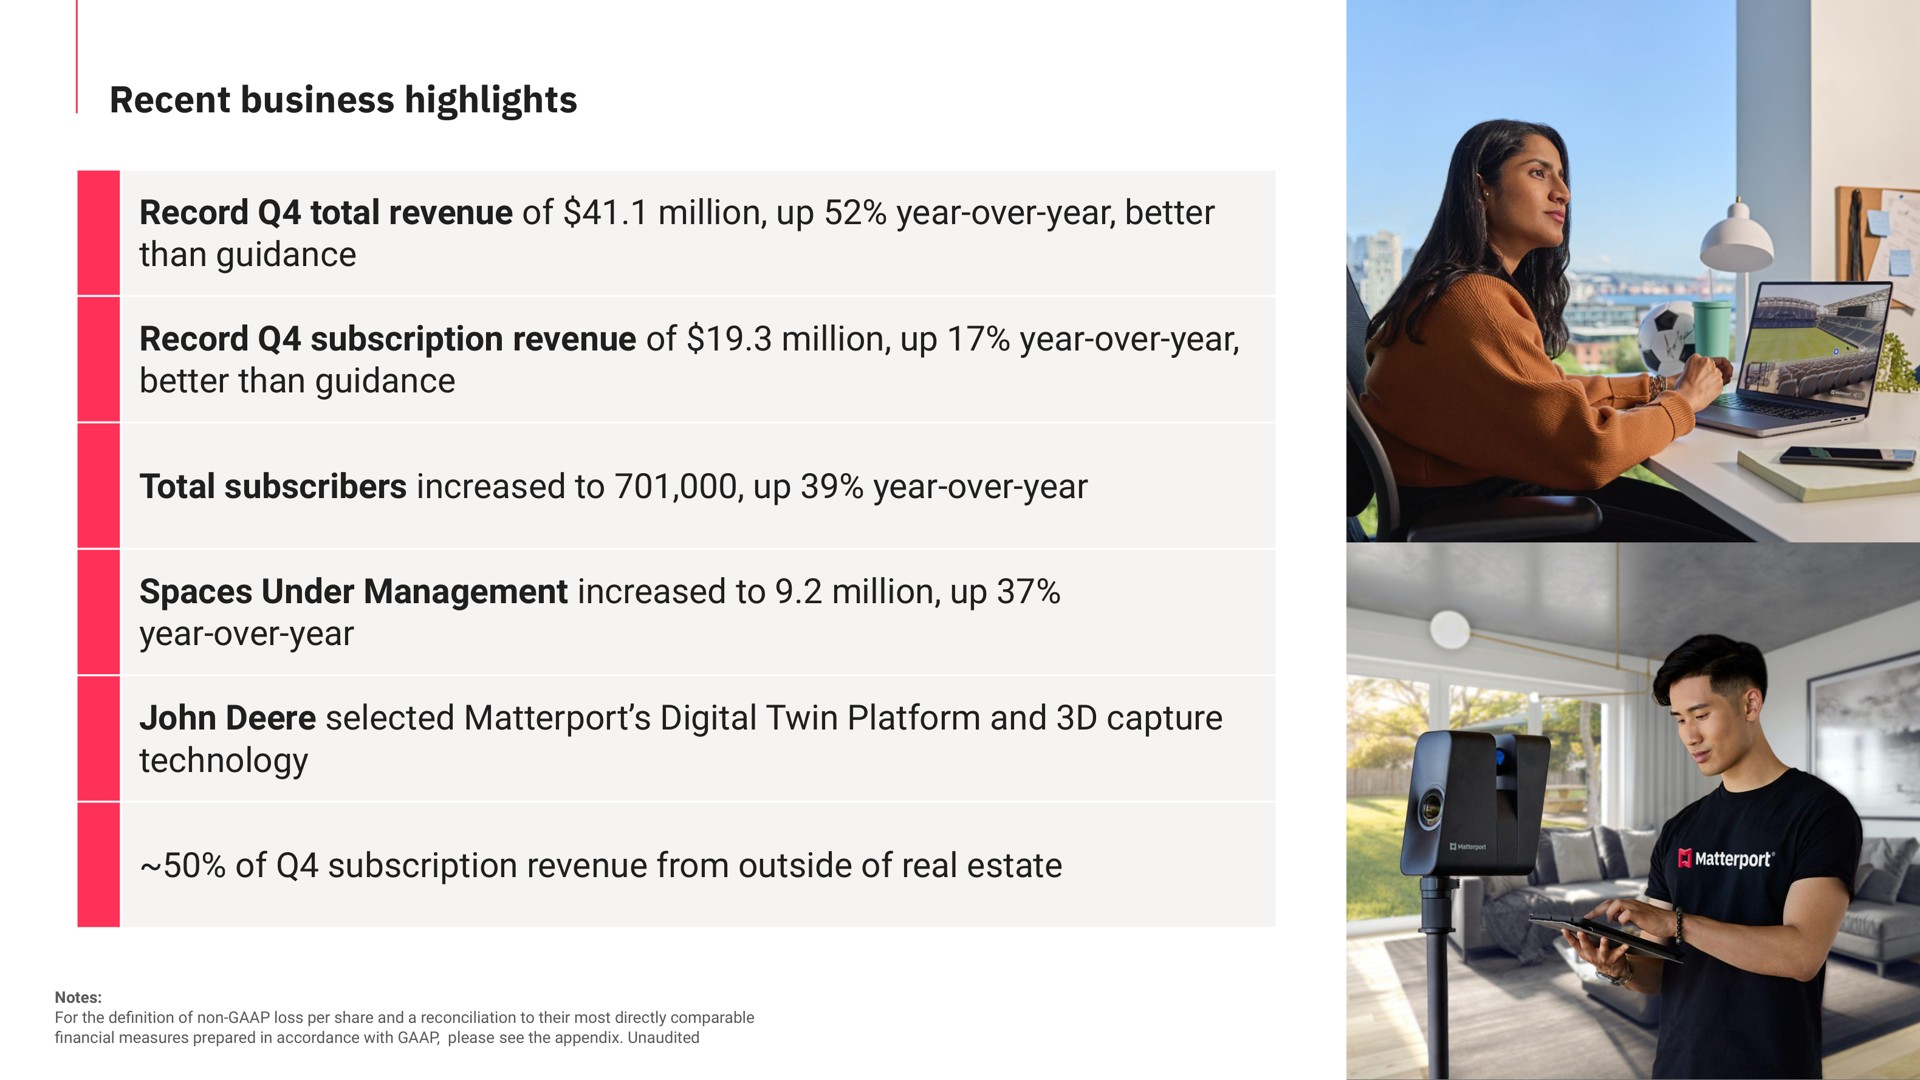 recent business highlights record total revenue of million up year over year better than guidance record subscription revenue of million up year over year better than guidance total subscribers increased to up year over year spaces under management increased to million up year over year selected digital twin platform and capture technology of subscription revenue from outside of real estate | Matterport